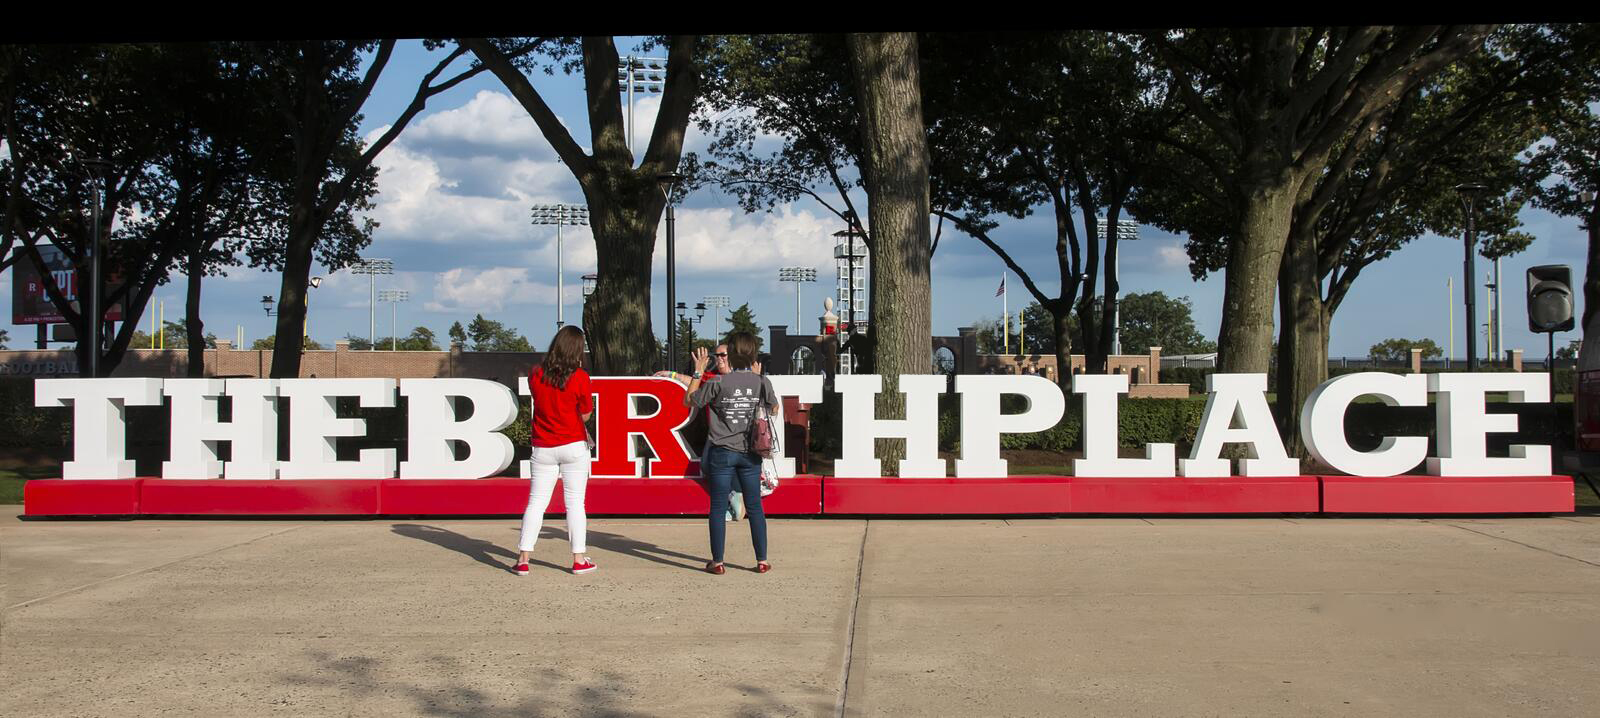 Custom foam 3d letters at Rutgers University that spell out The Birthplace